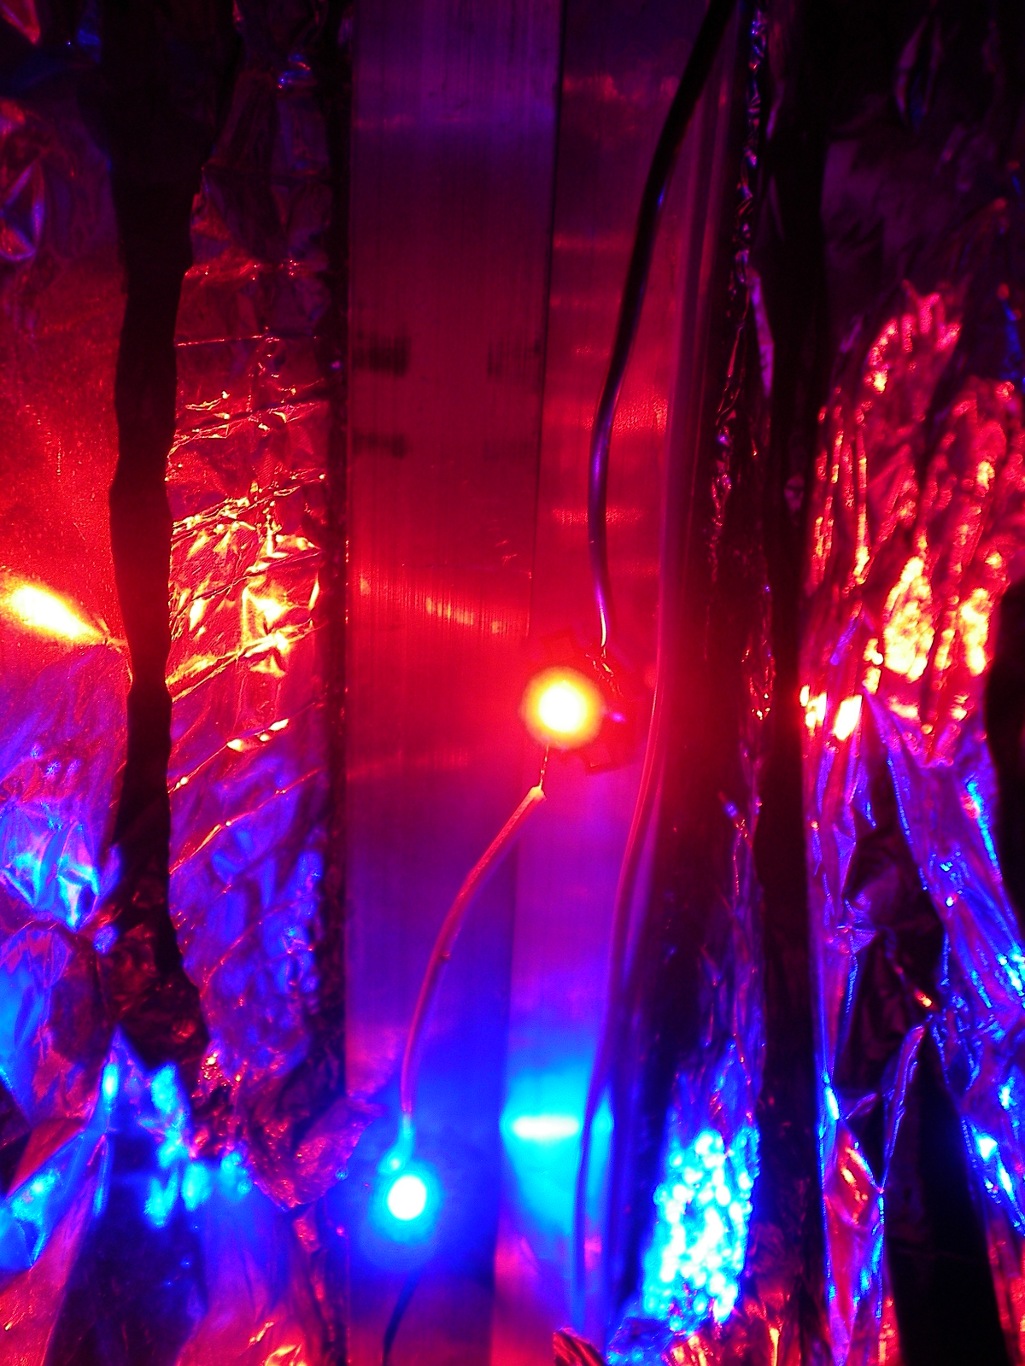 Building Your Own High-Power LED Grow for Hydroponics Science in